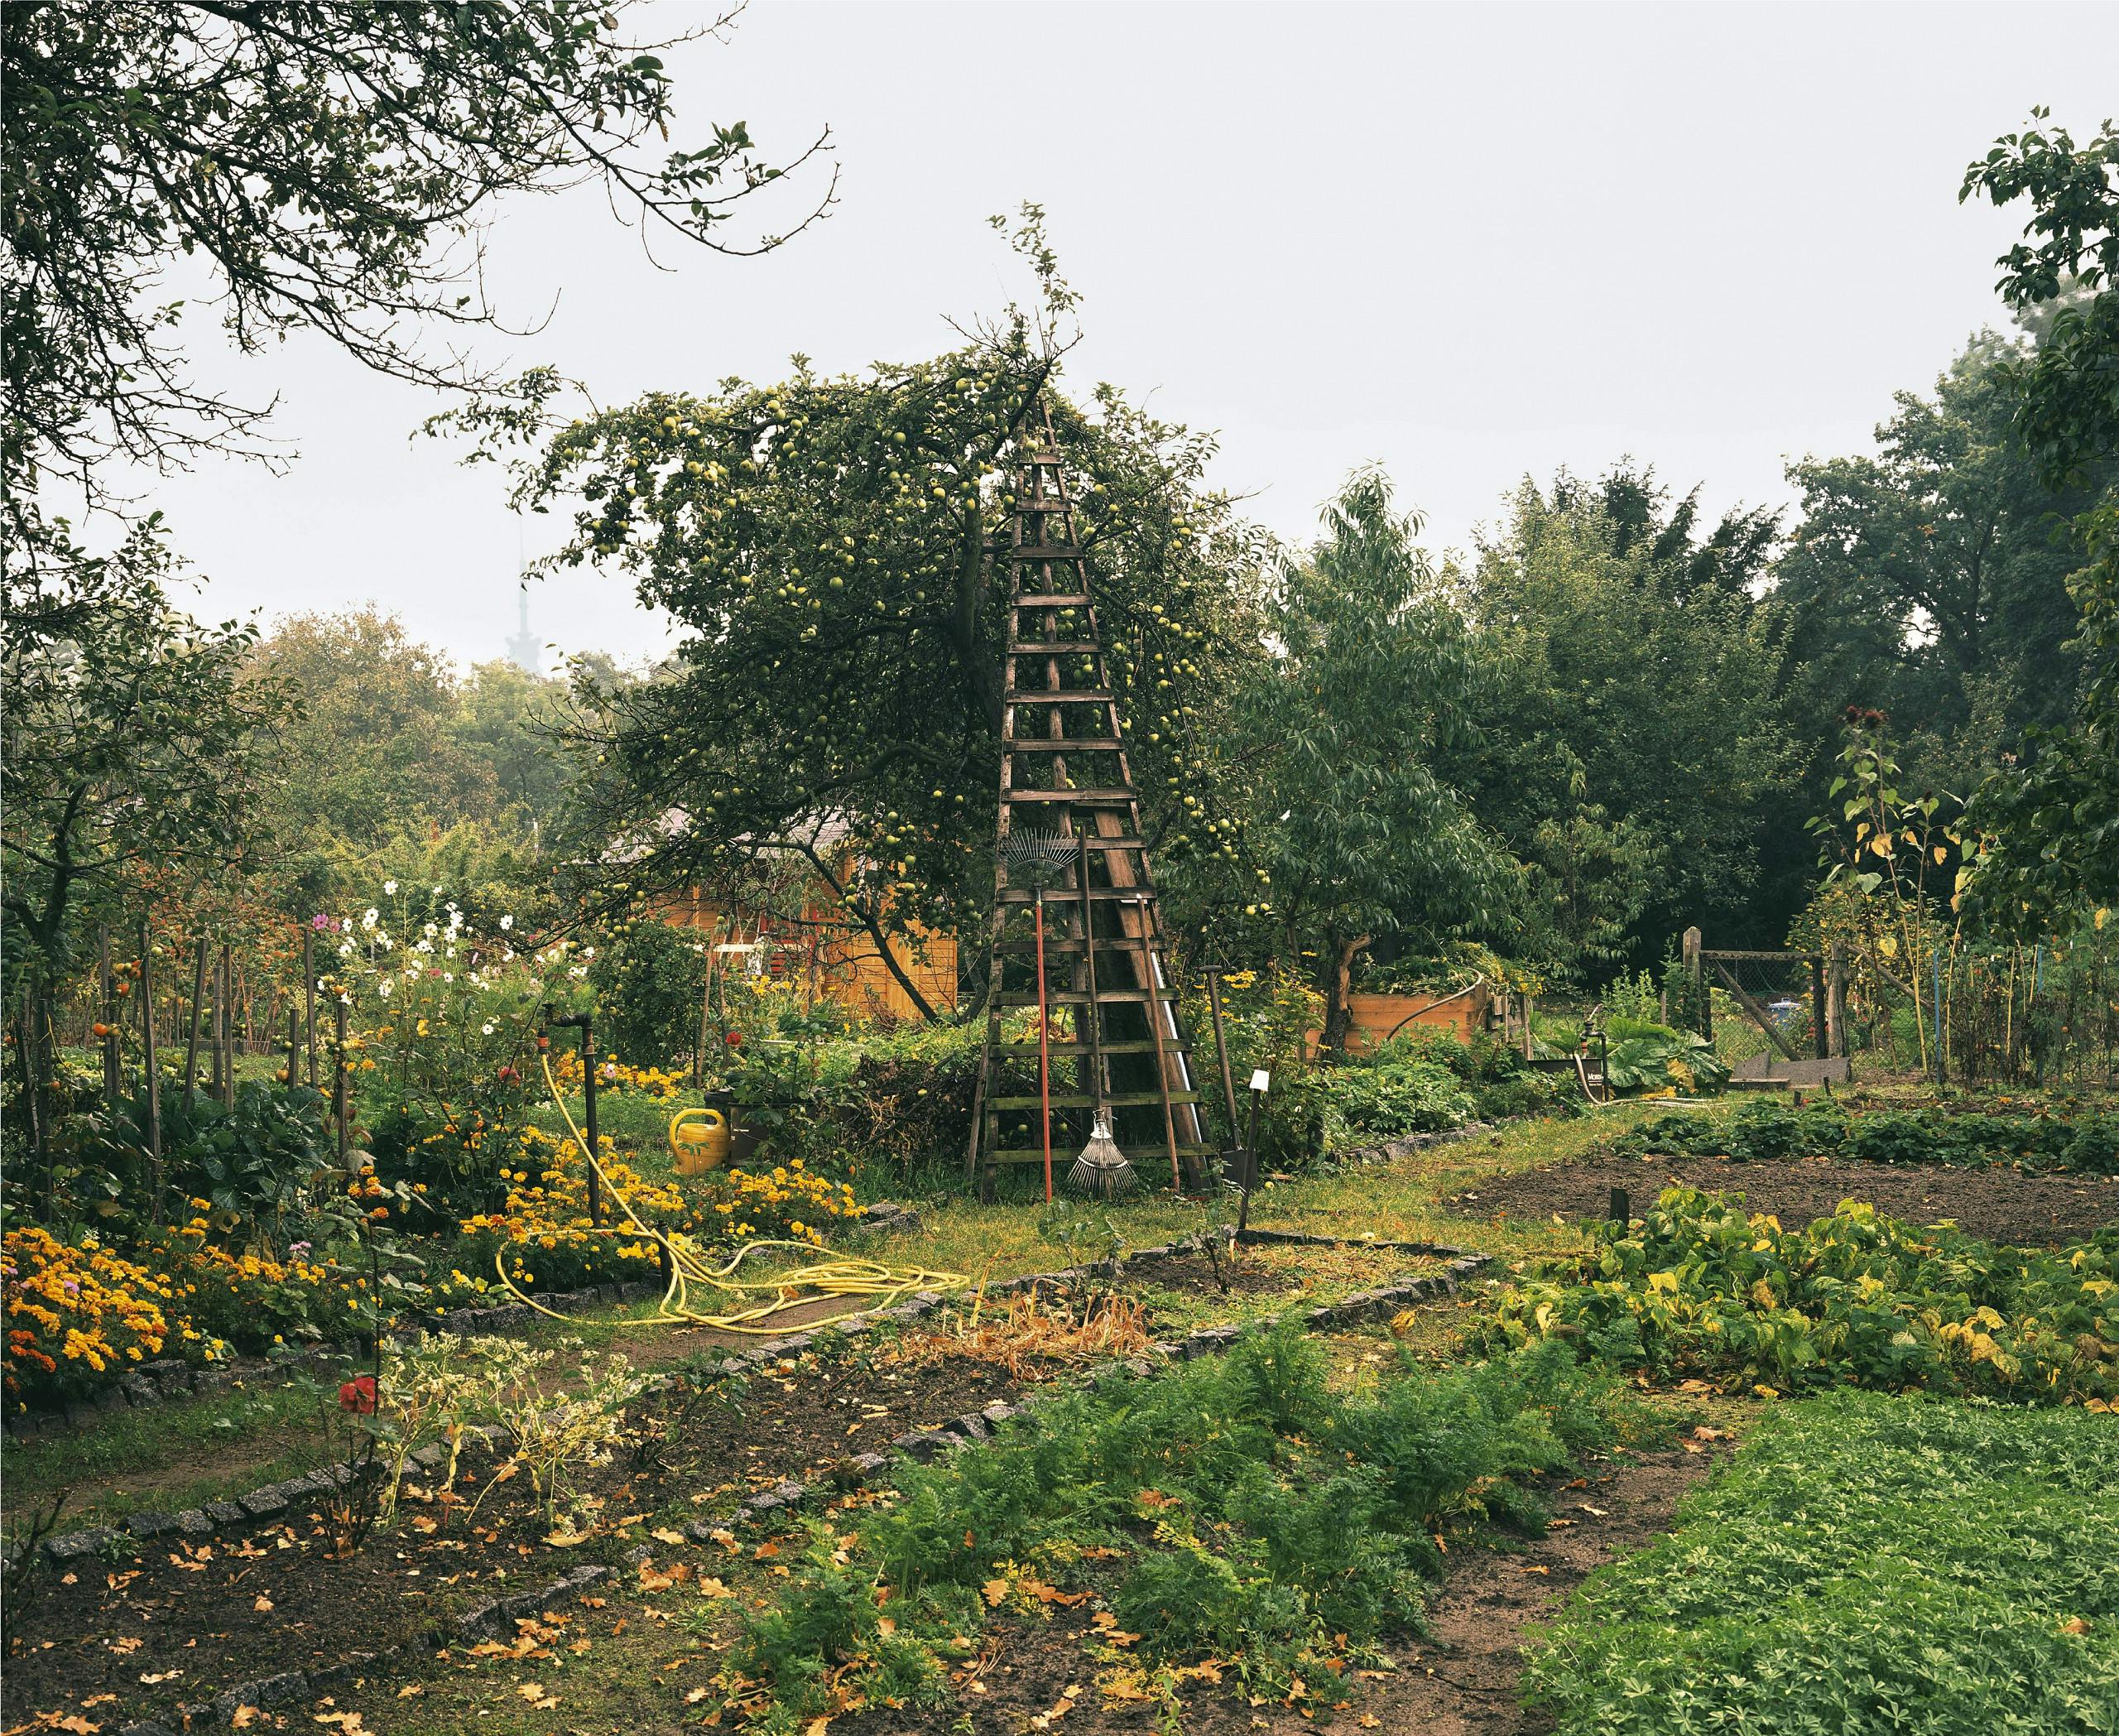 An allotment garden where vegetables are grown and a large wooden ladder leans against a full apple tree.